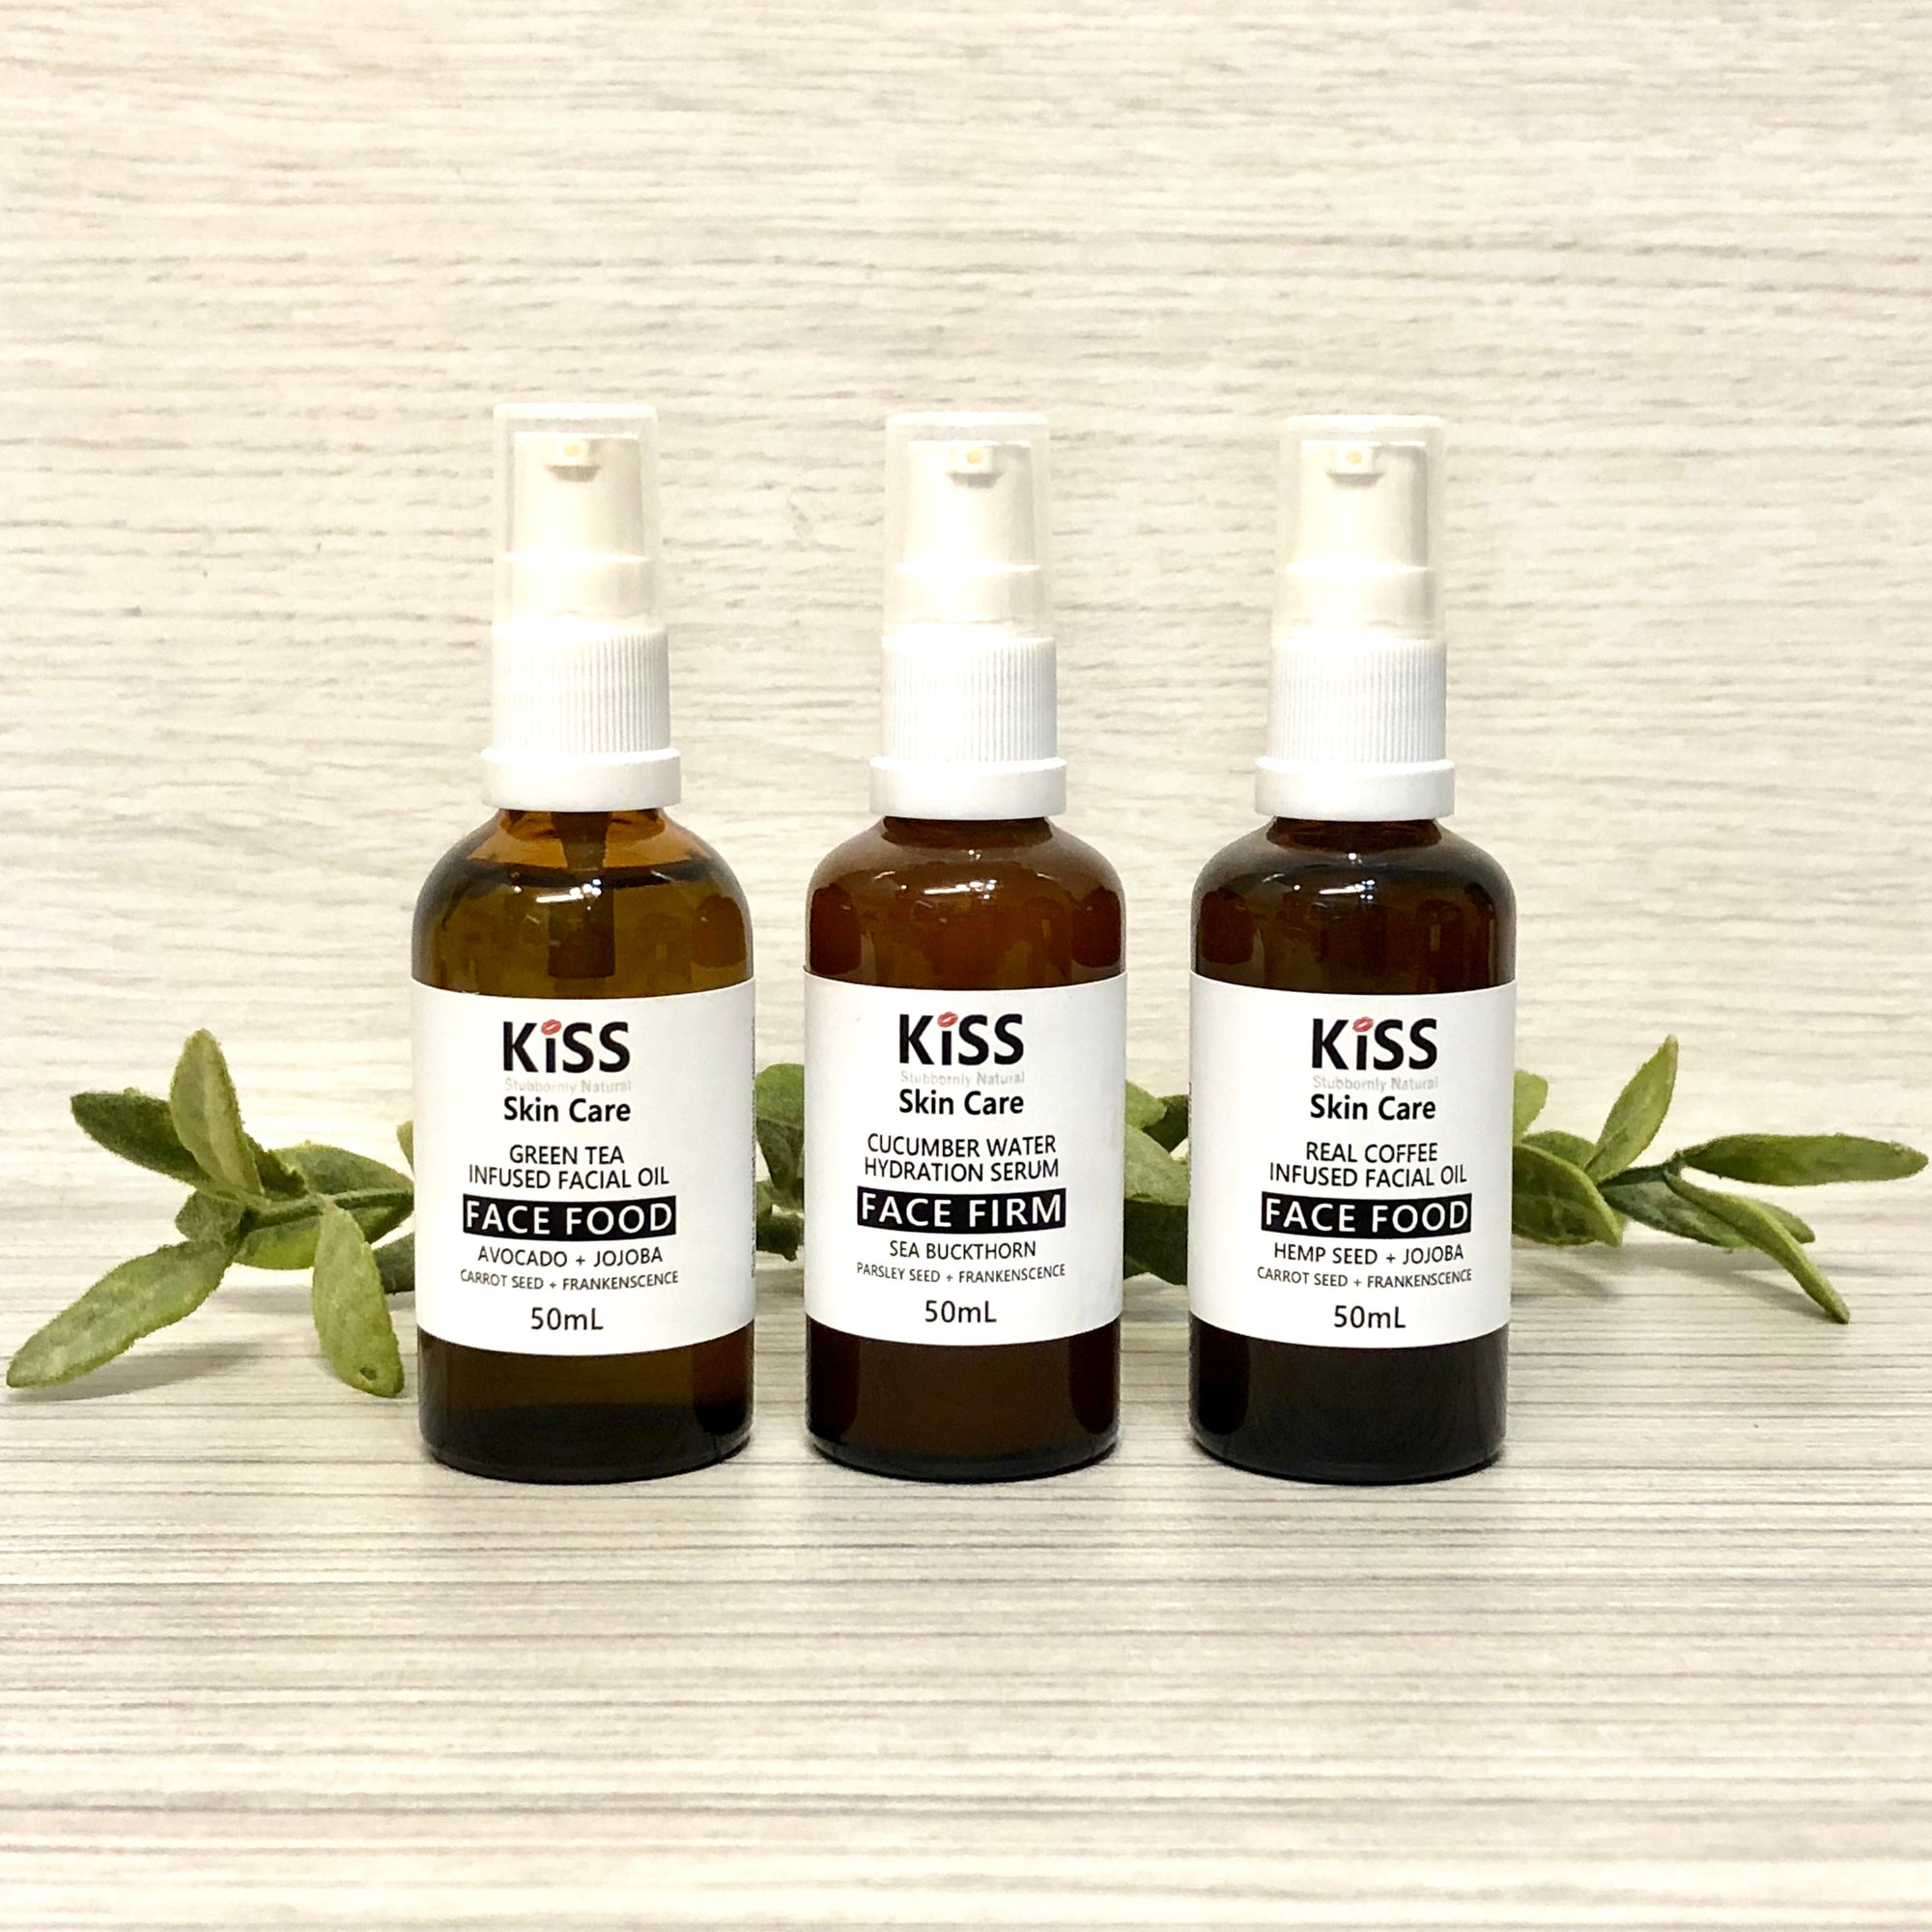 Skin Care created with a KISS